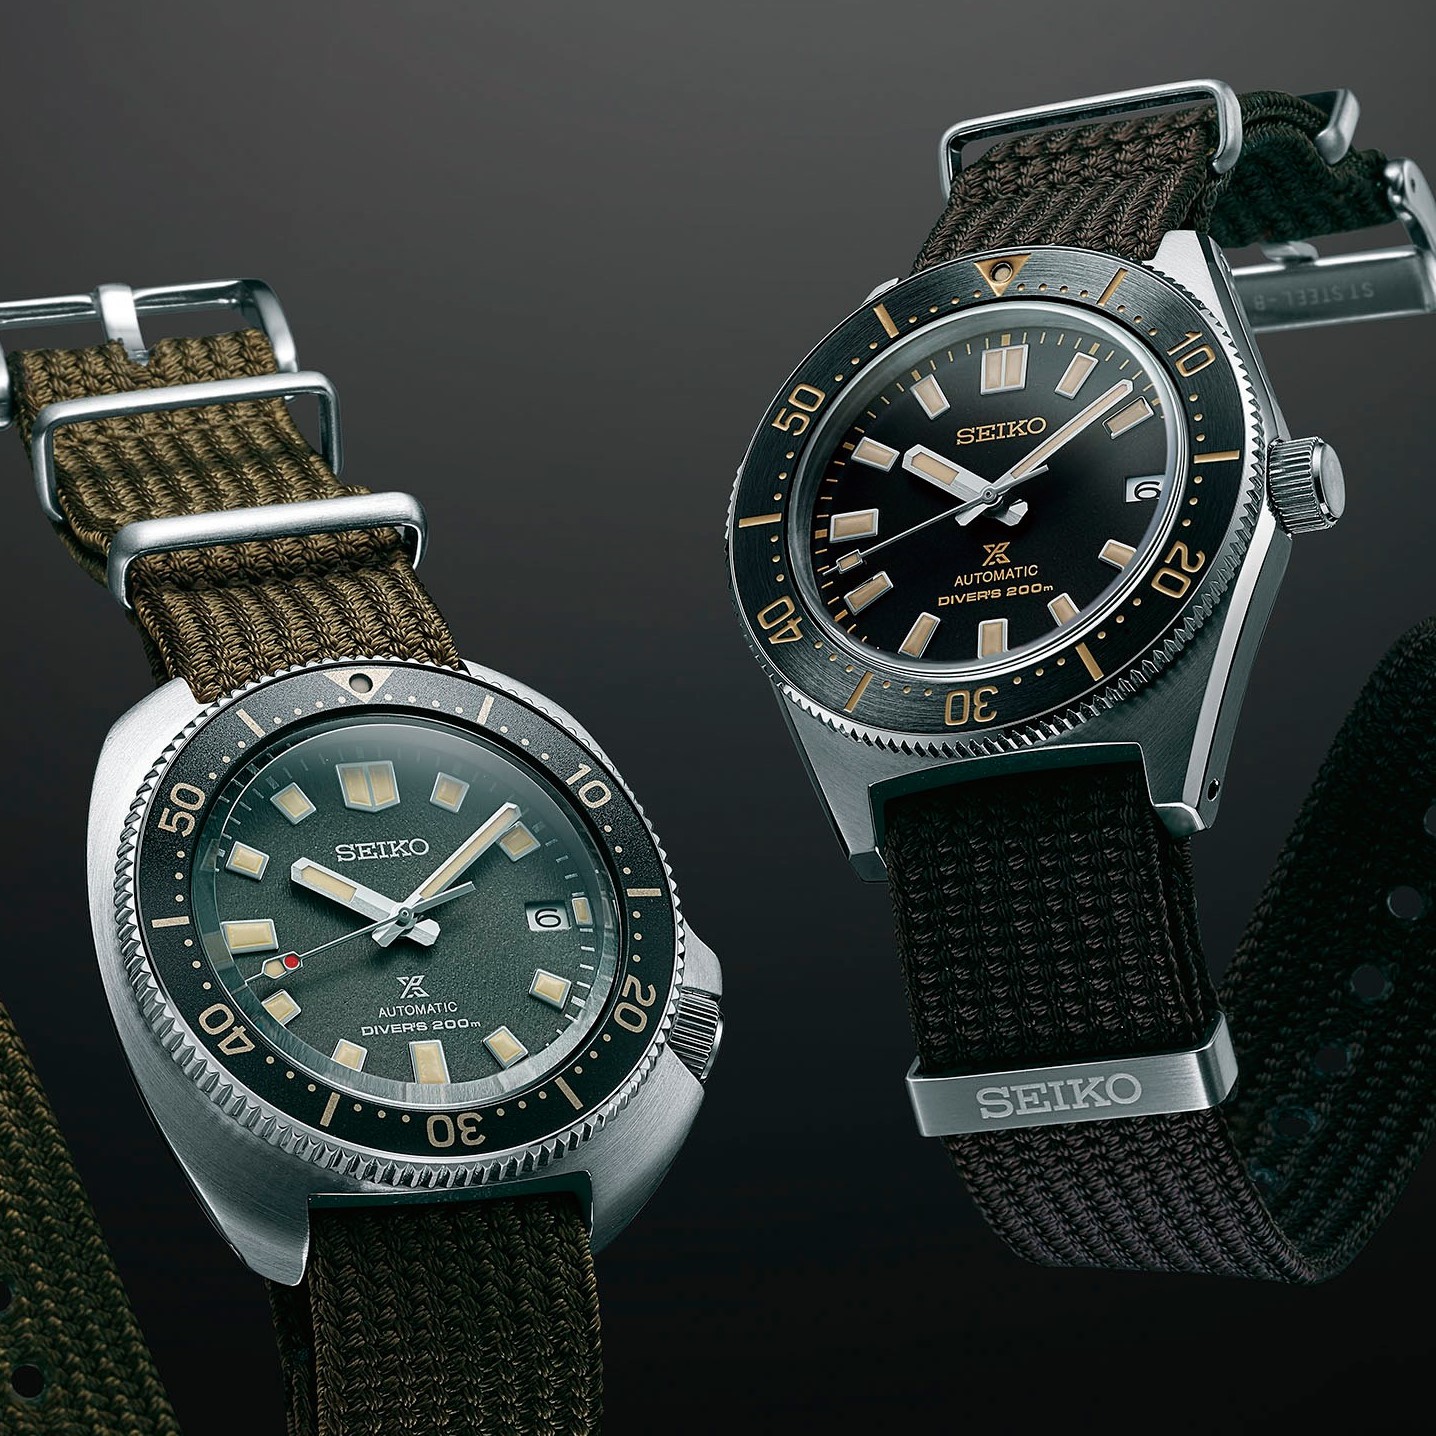 Vintage Dive Watches Resurface as Seiko Introduces New SPB239 and SPB237, Inspired by and '70s Models | WatchTime - USA's No.1 Watch Magazine